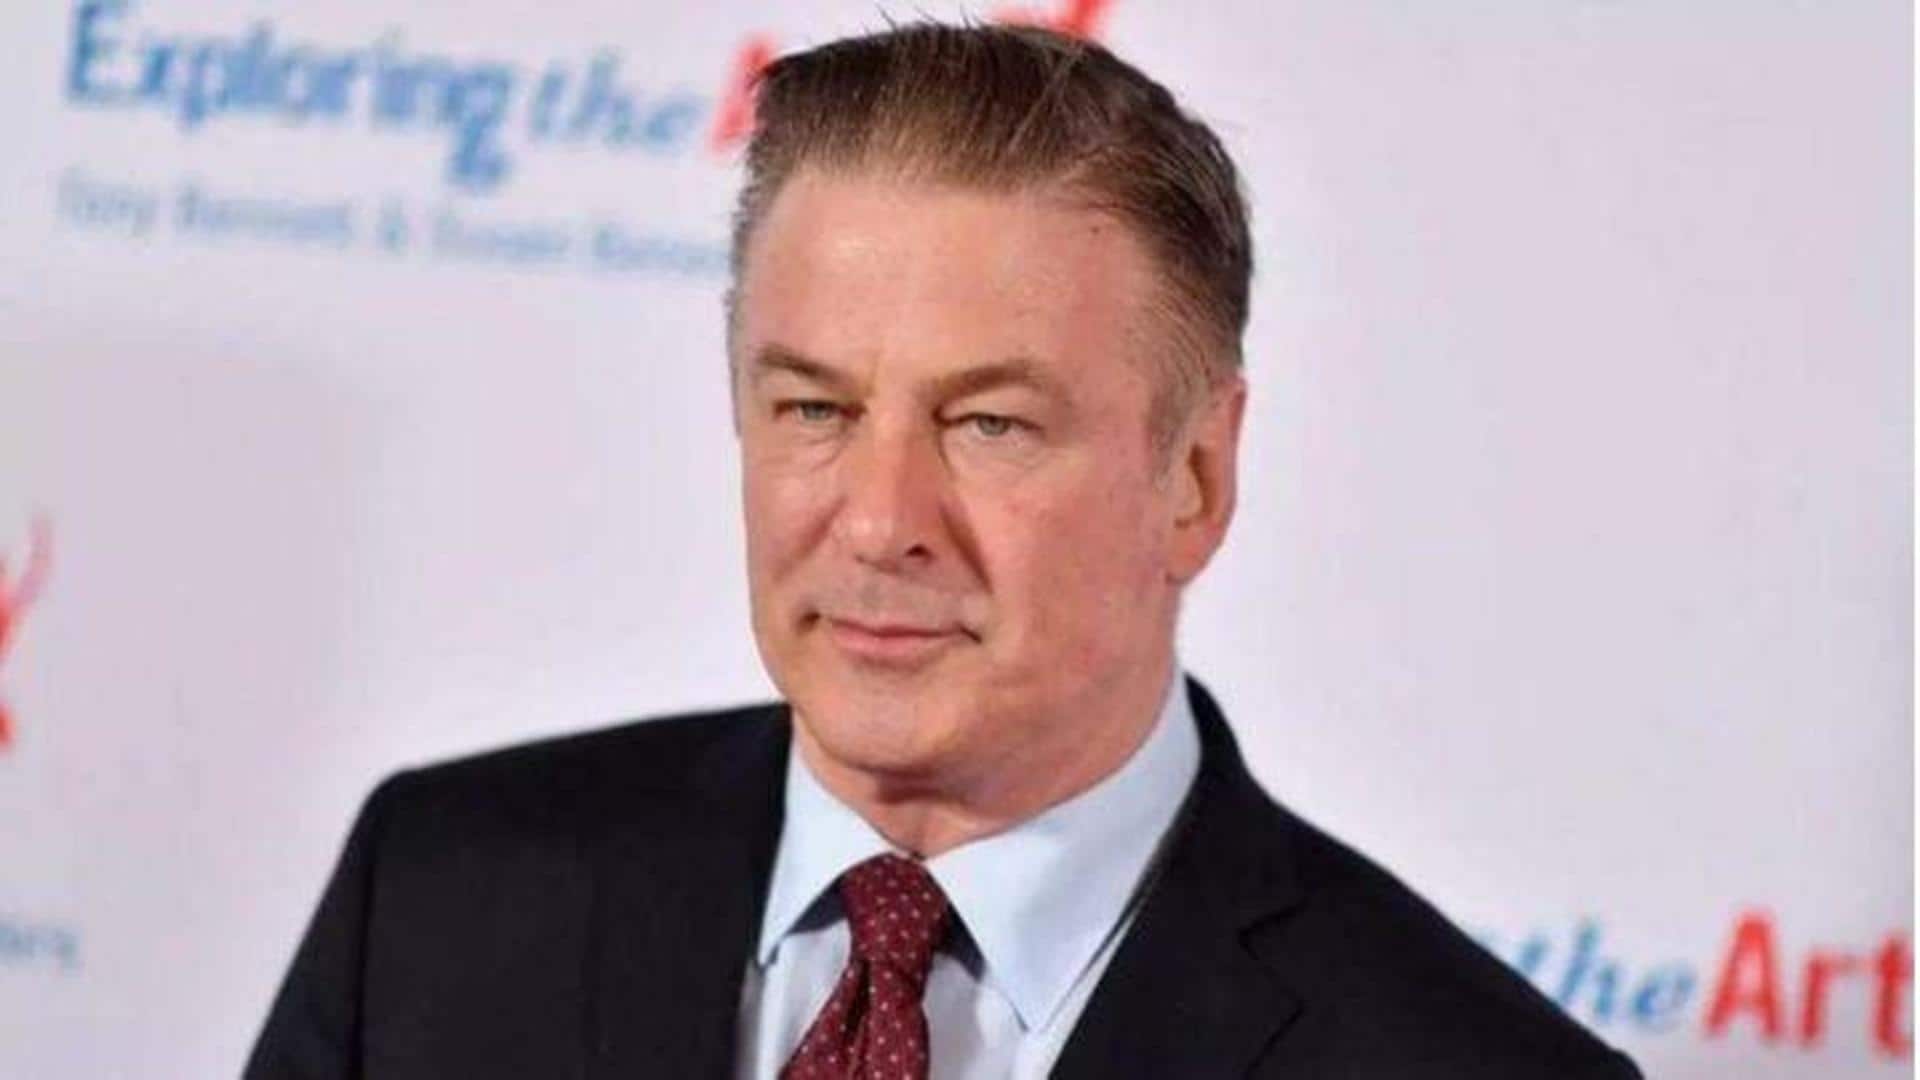 #RustShooting: Manslaughter charges dropped; trouble for Alec Baldwin still looms